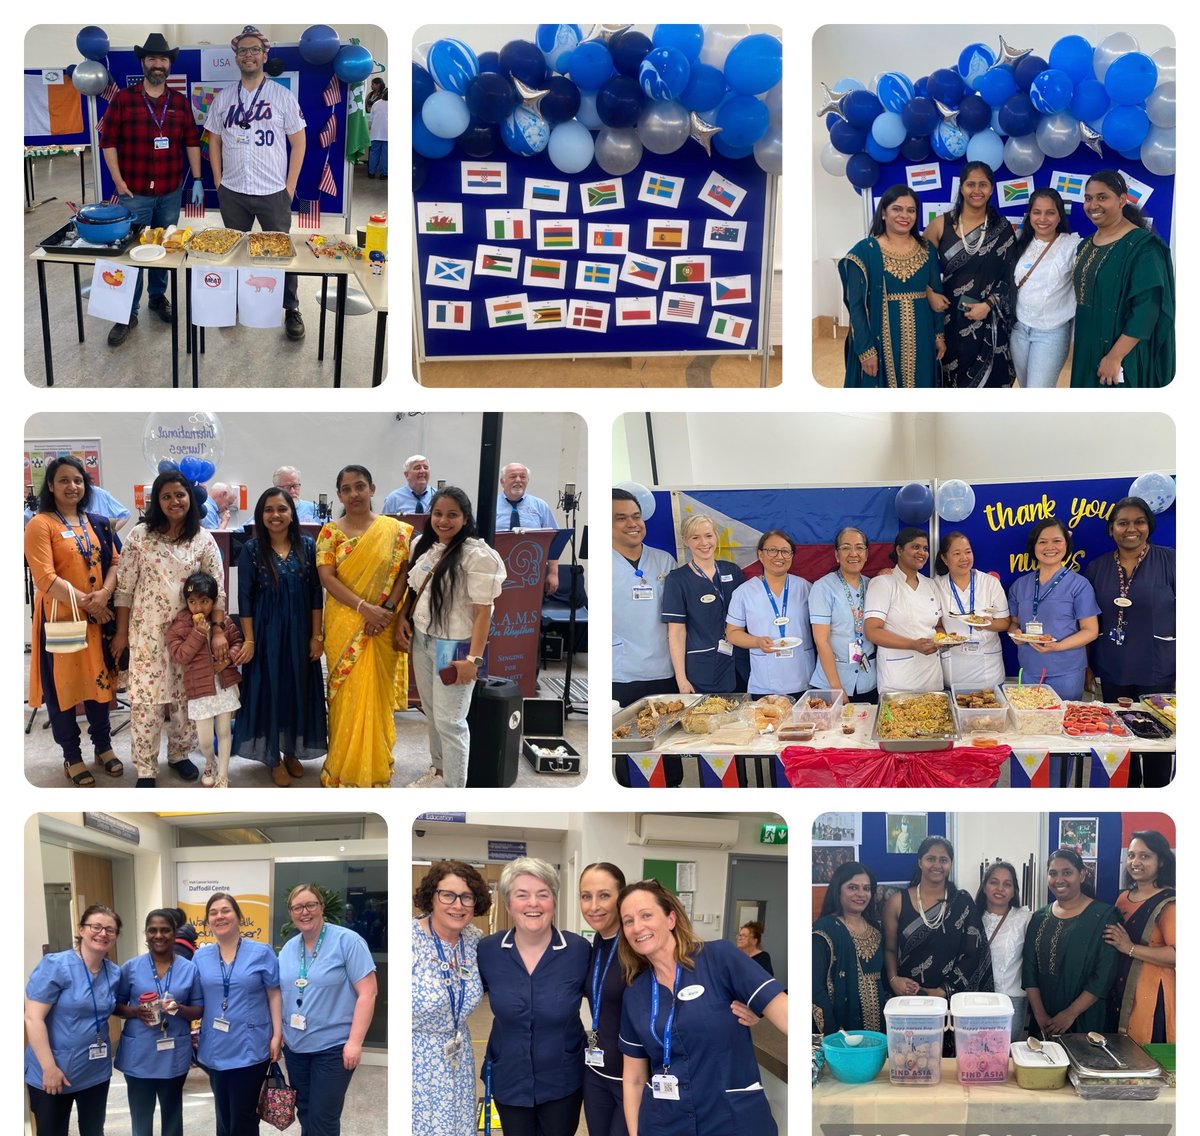 A fantastic day in Beaumont Hospital today celebrating all of our wonderful nurses for IND 2024 @Yvonne13Ryan @BeaumontMag4E @NdigginNiamh @nettybutler @Cfinnipc @fionnuala_duffy @Mariagreene8